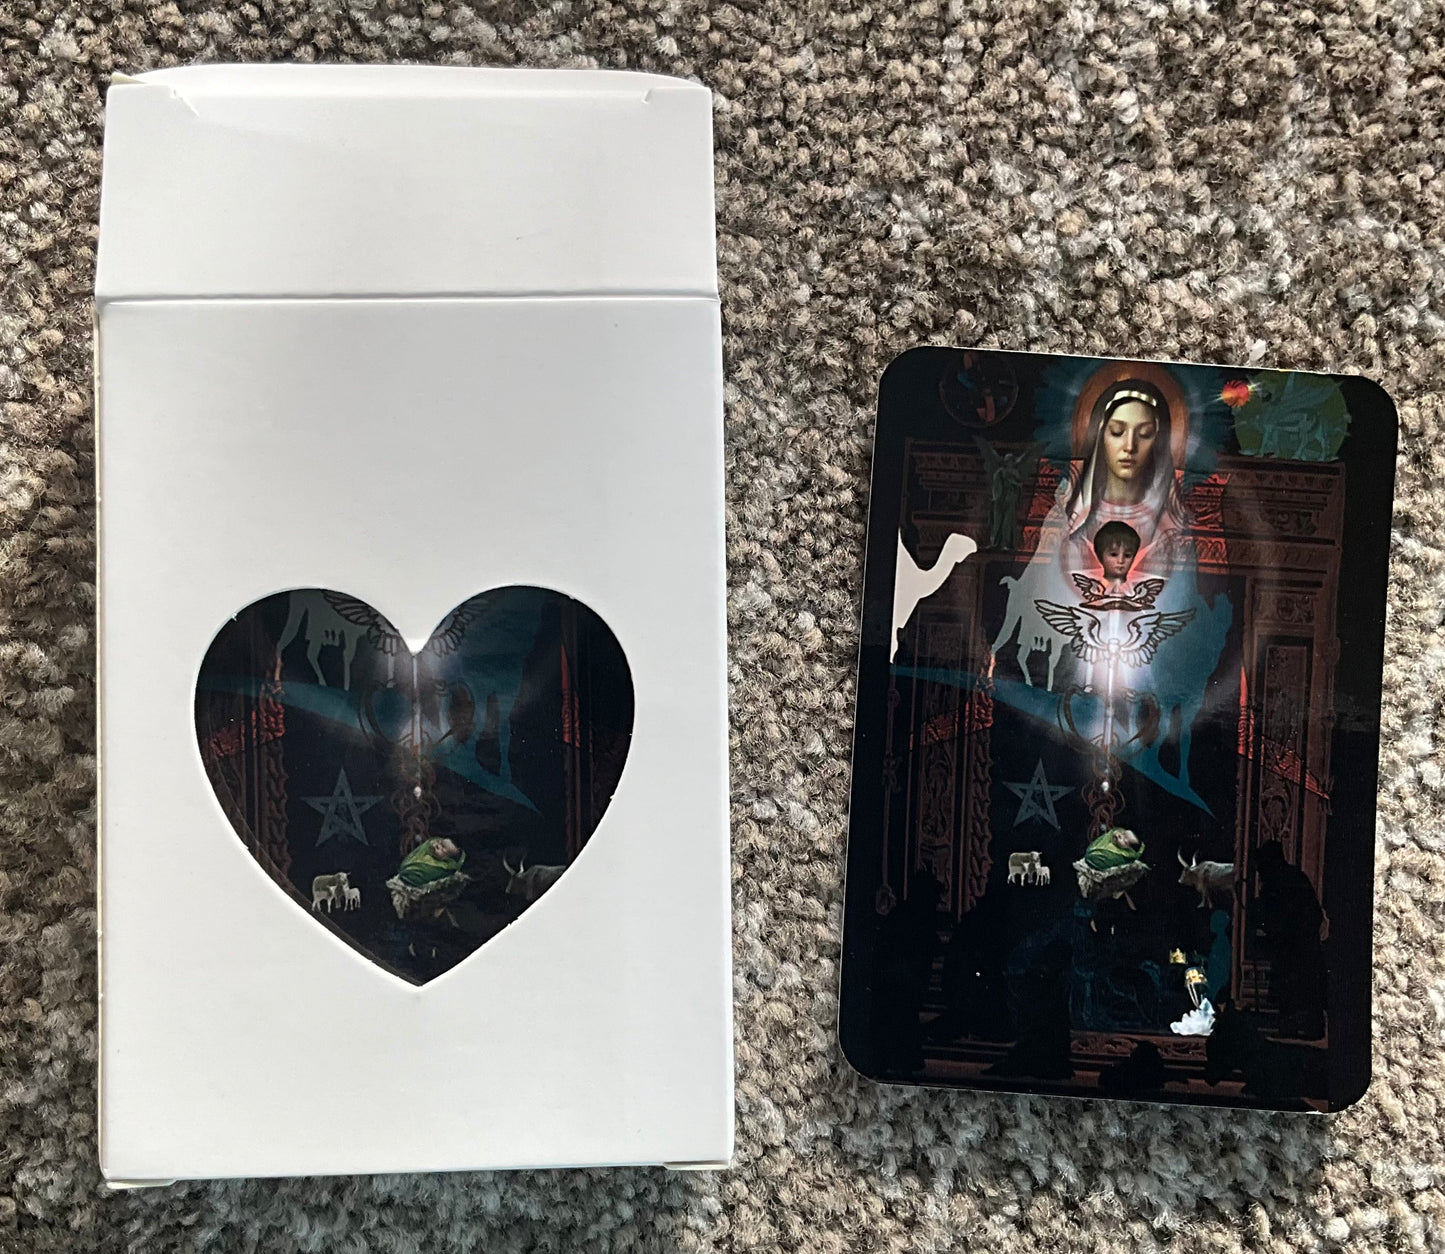 ***Special Edition*** - Custom  Design - Beacon of Hope and Light Artworks  - Nativity Playing Cards - 2023